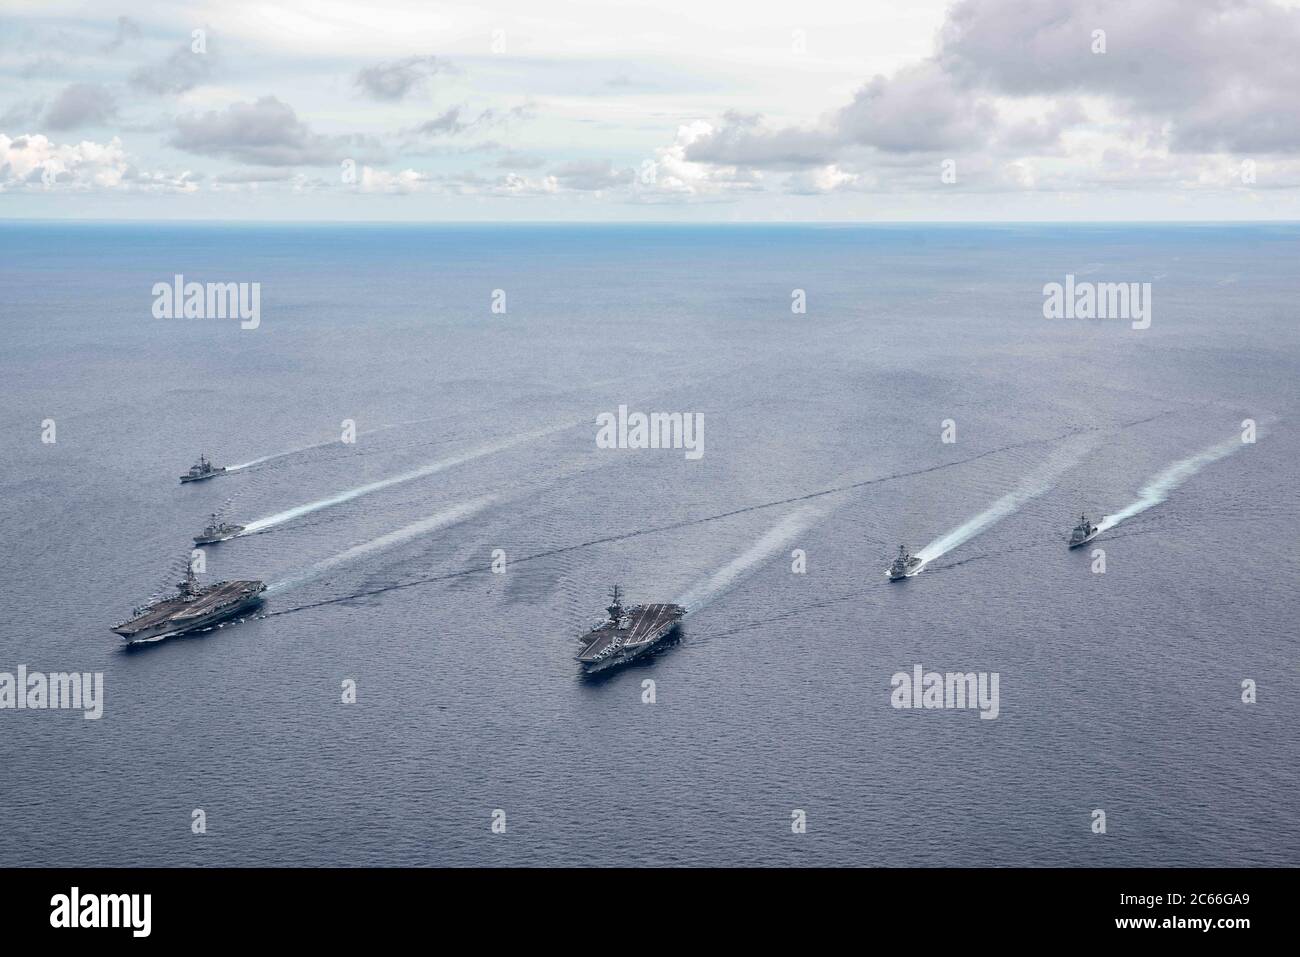 The U.S. Navy Nimitz-class aircraft carriers USS Ronald Reagan and USS Nimitz along with their Carrier Strike Groups steam in formation during dual-carrier operations July 6, 2020 in the South China Sea. Stock Photo